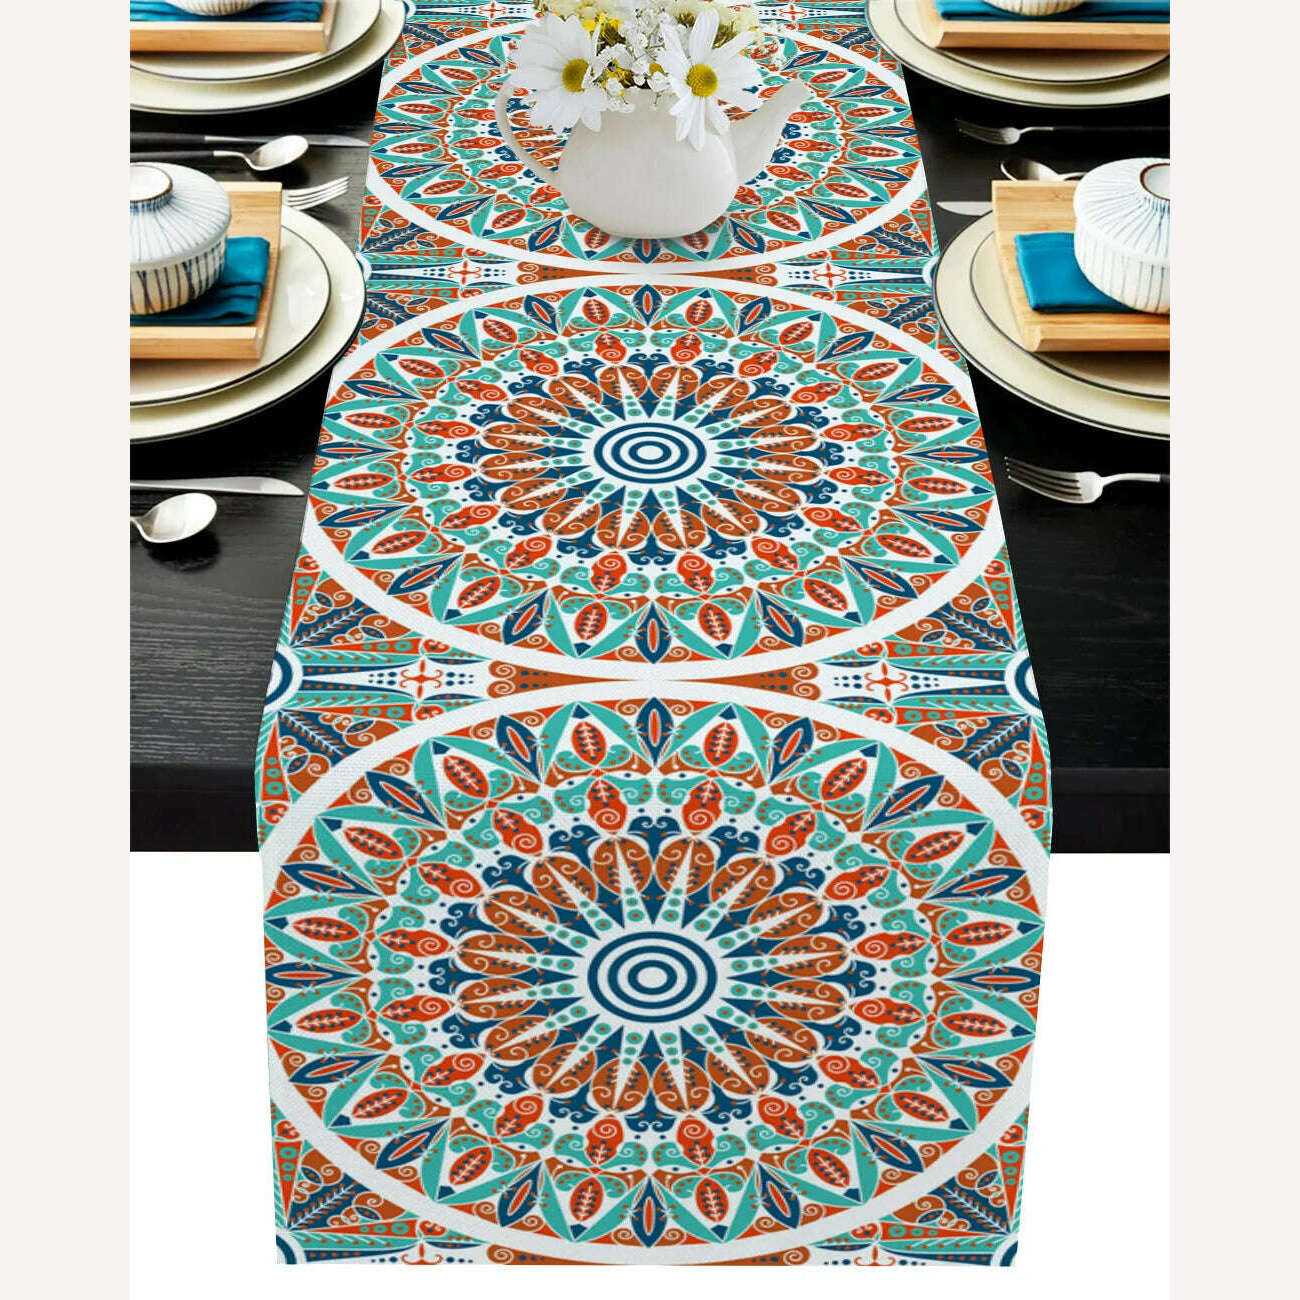 KIMLUD, Linen Burlap Table Runner Colorful Morocco Flowers Islam Arabesque Kitchen Table Runners Dinner Party Wedding Events Decor, LEX10445 / 150x33cm59x13inch, KIMLUD Womens Clothes